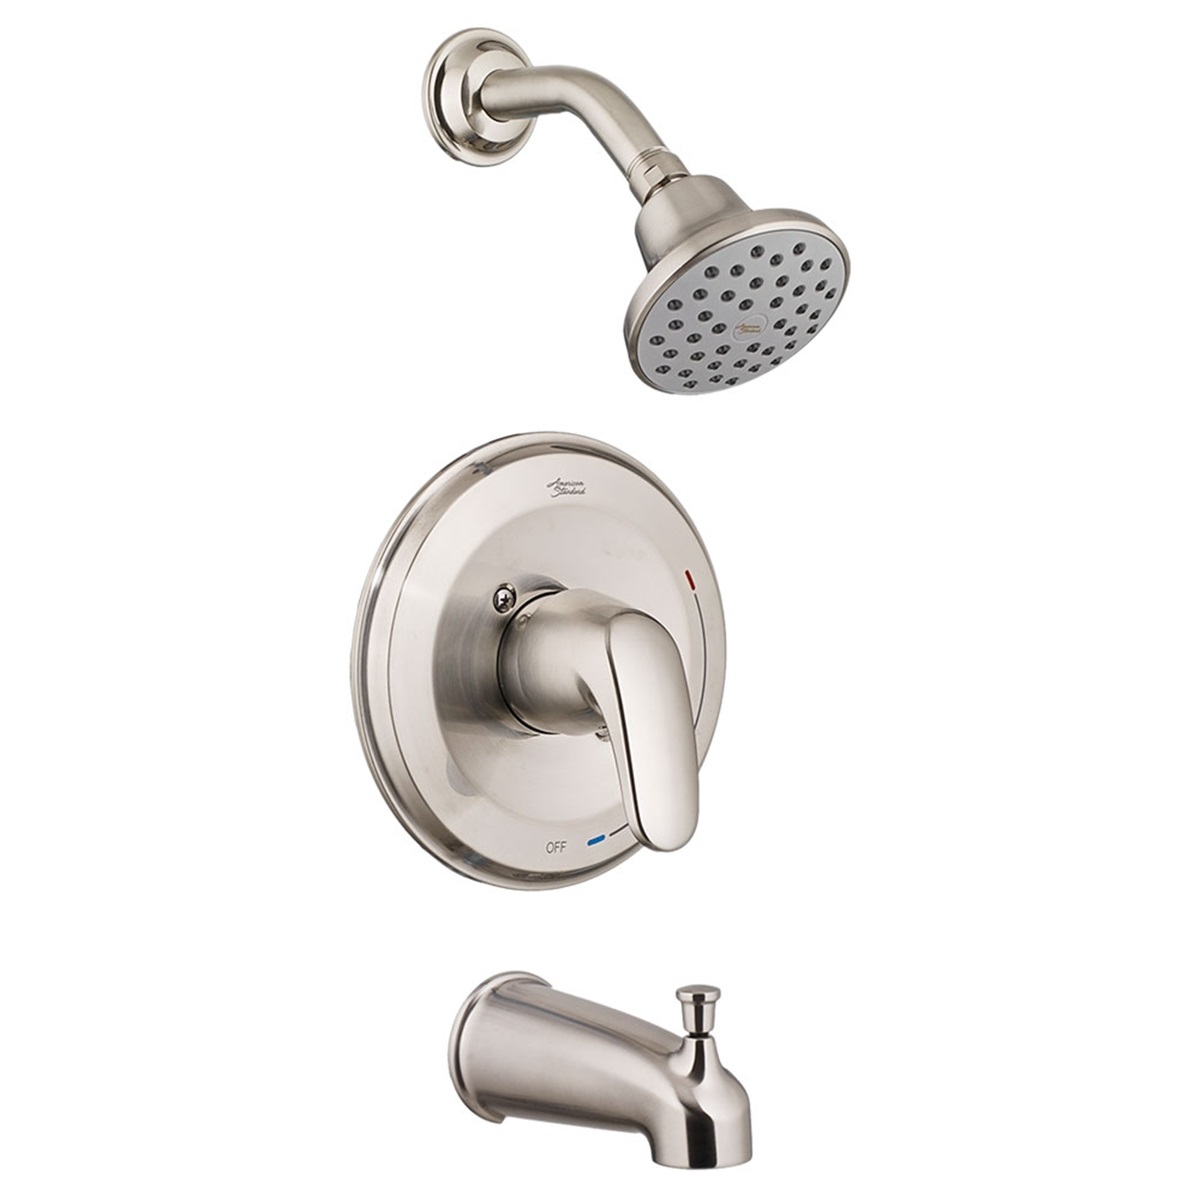 T075.507.295 COLONY PRO
SHOWER ONLY TRIM BRUSHED
NICKEL A/S